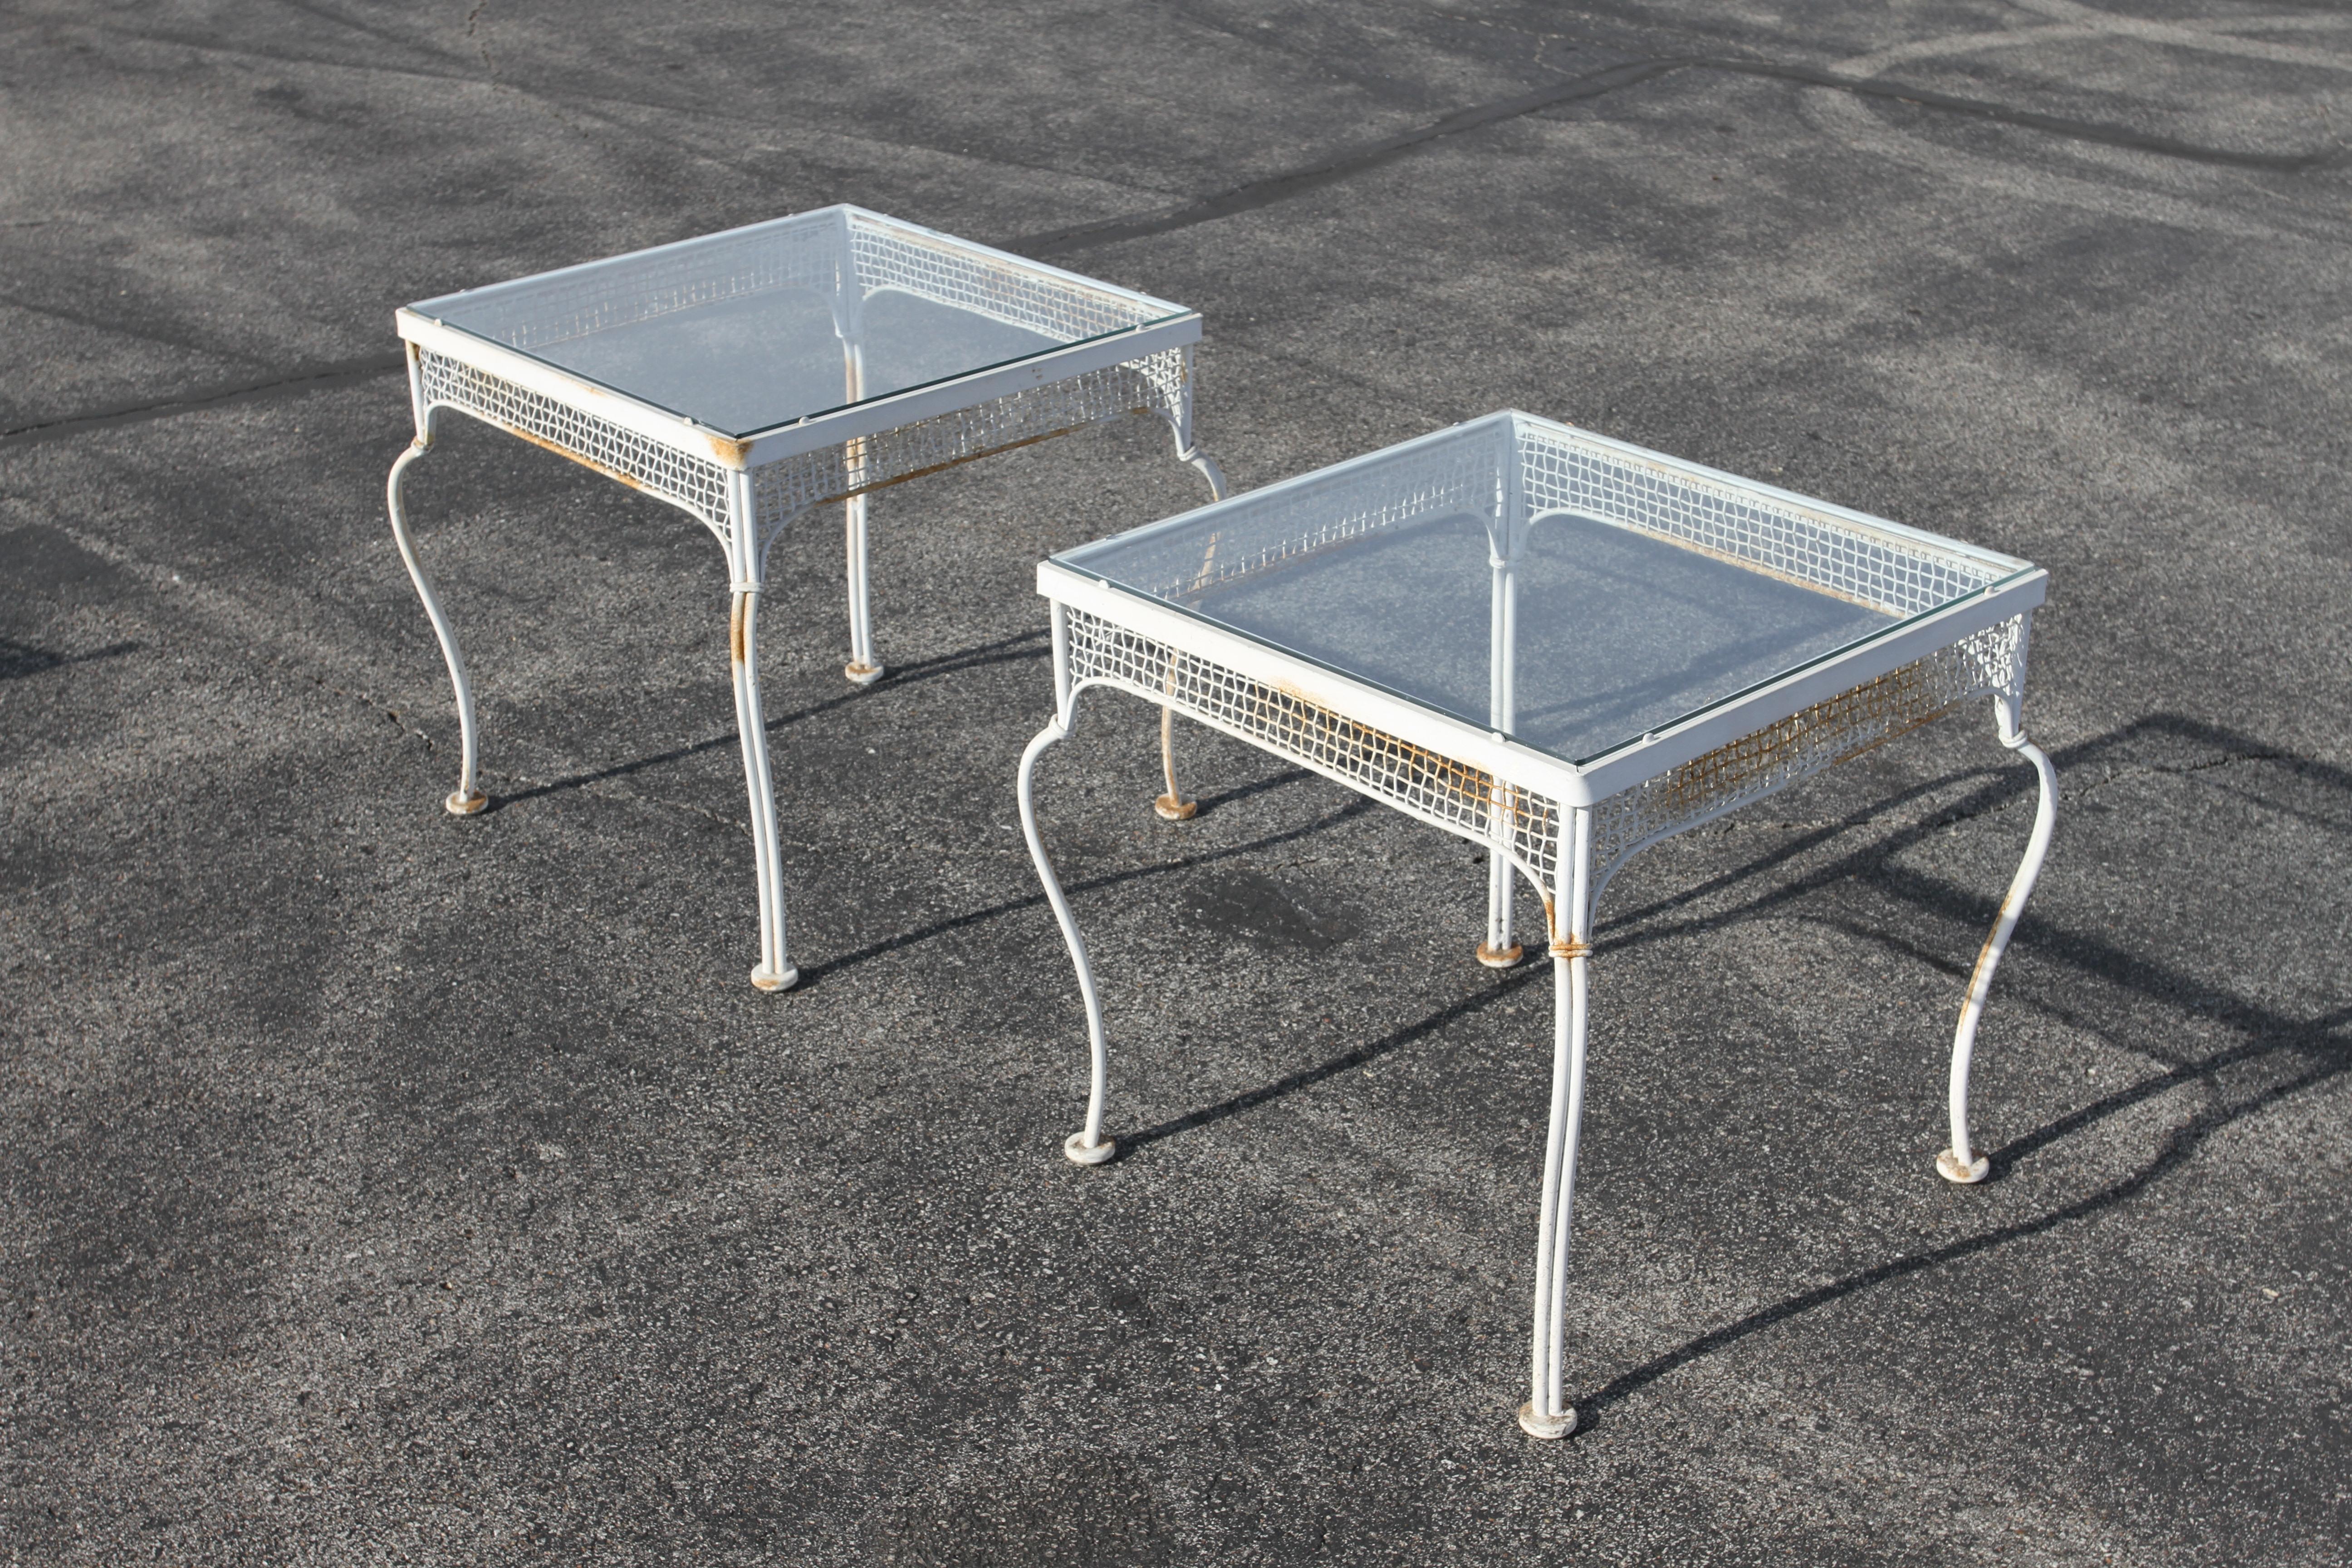 Classic and Rare 1950s midcentury Palm Beach style outdoor wrought iron and mesh patio / garden glass top end tables by Woodard Furniture Co. Part of a original set I'm offering for sale, see the matching tub / lounge chairs & table, round coffee